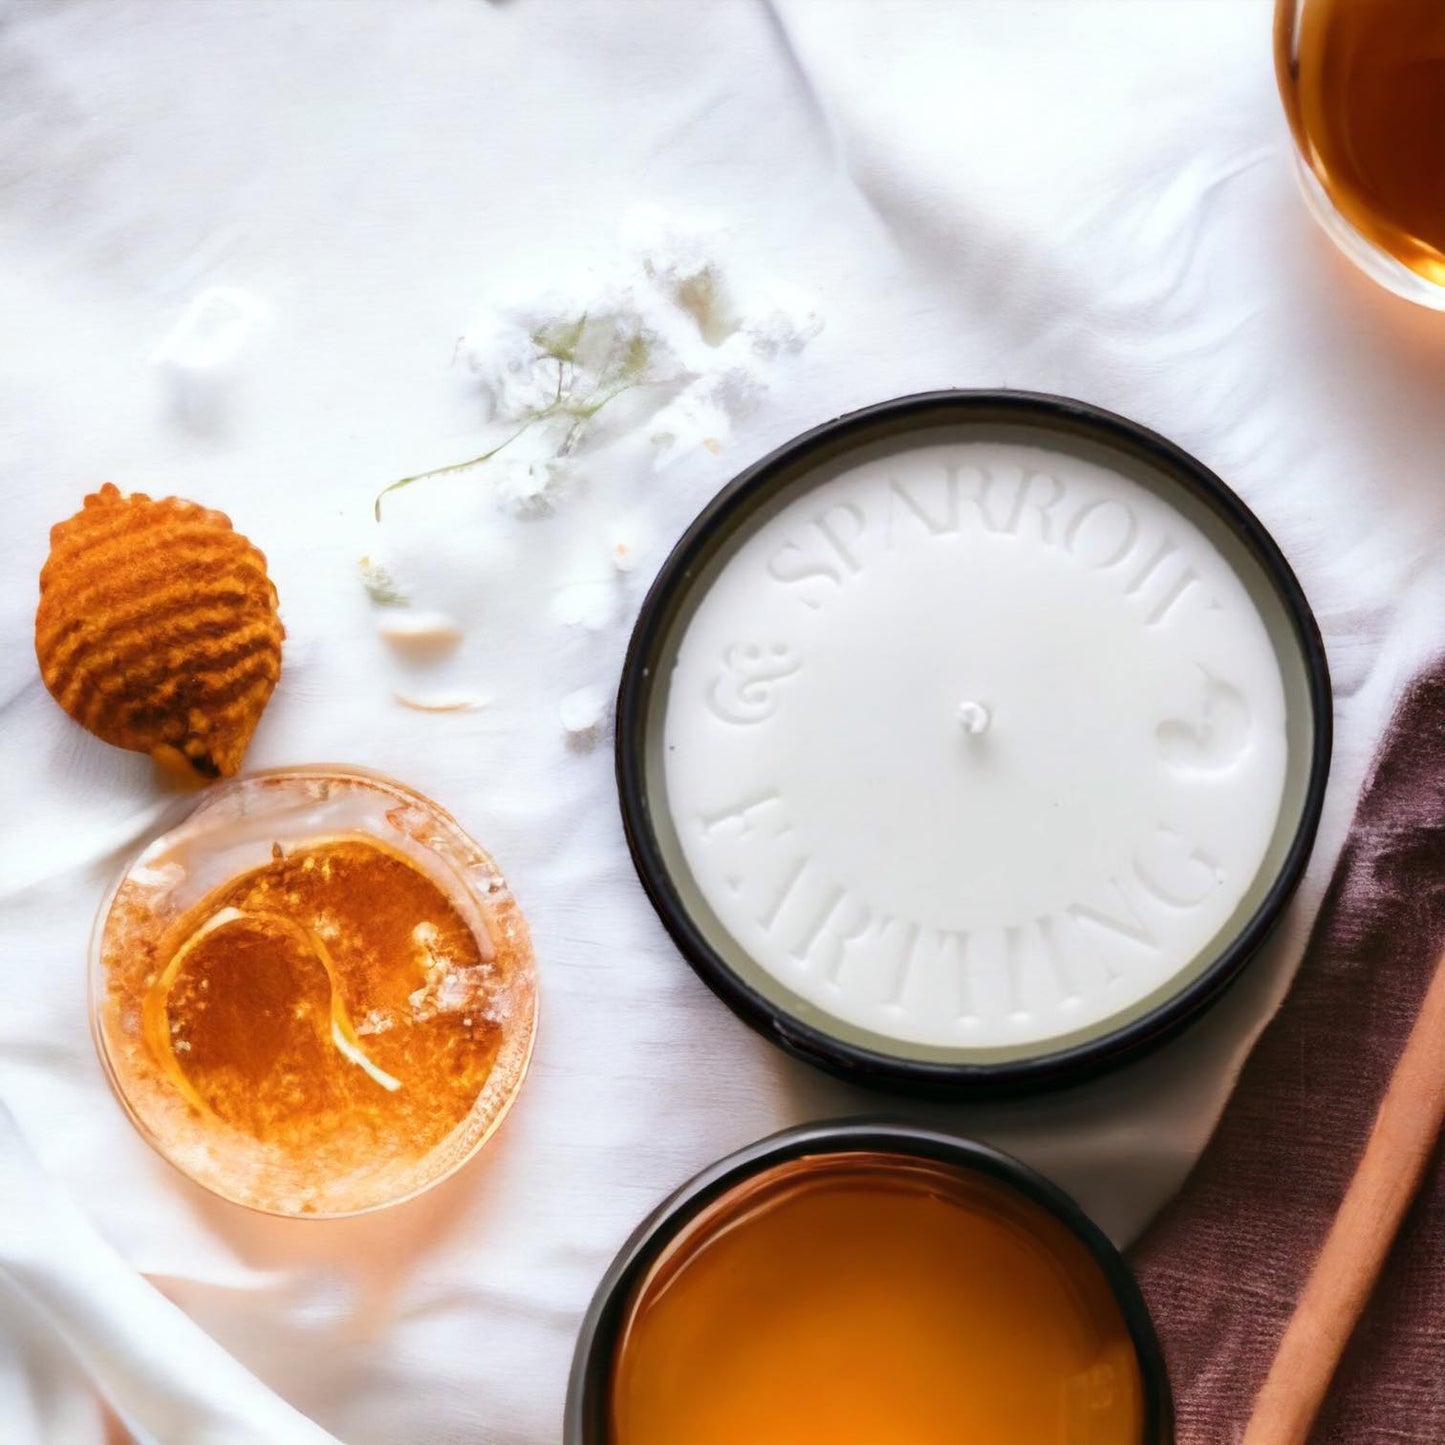 Honey & Clementine candle